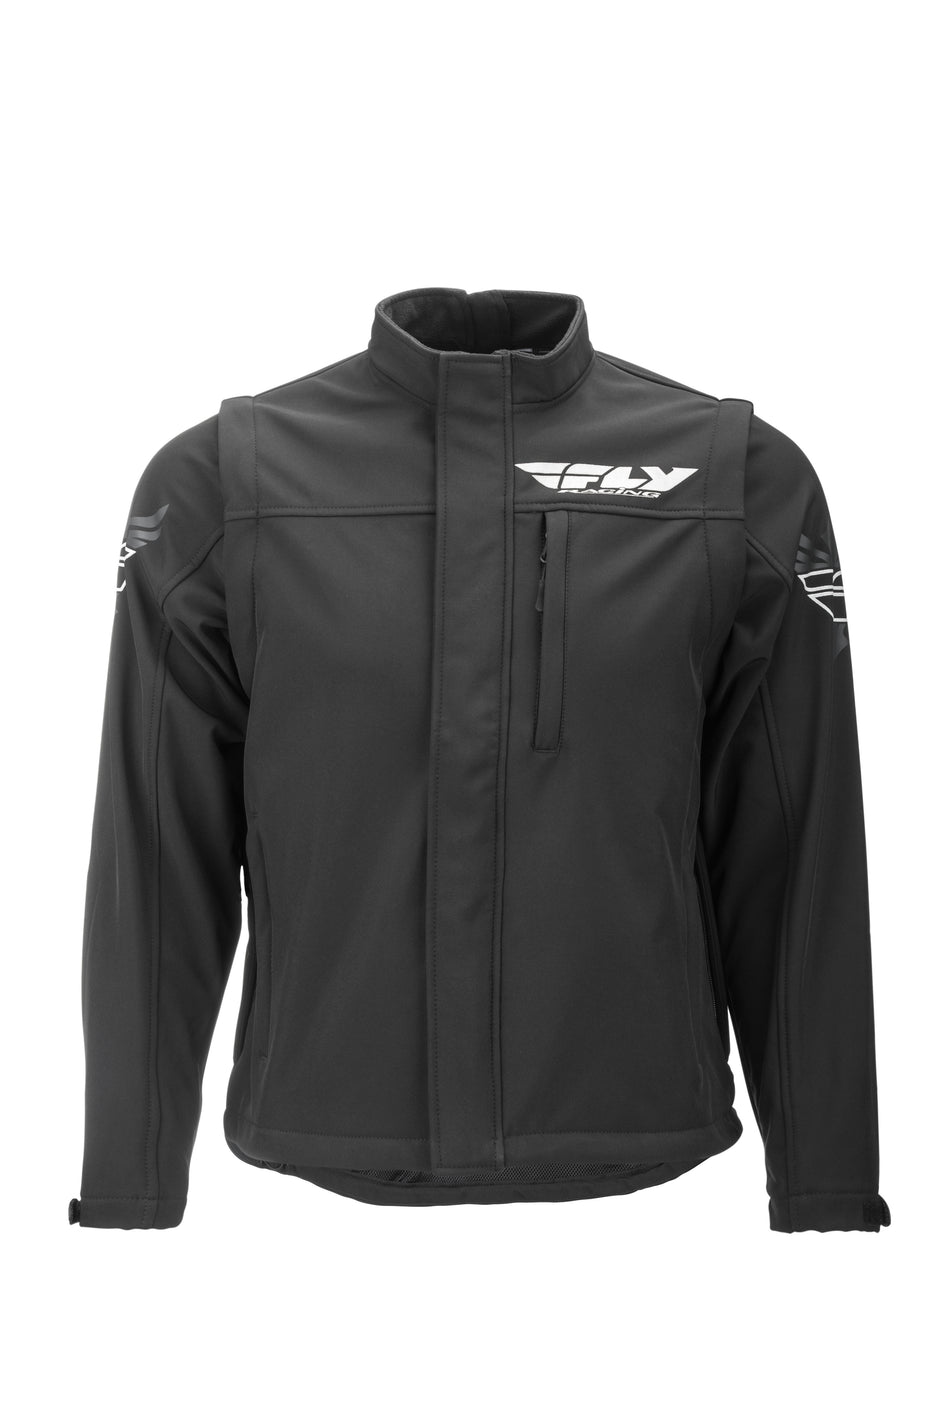 FLY RACING Fly Black Ops Convertible Jacket Black Sm 354-6060S